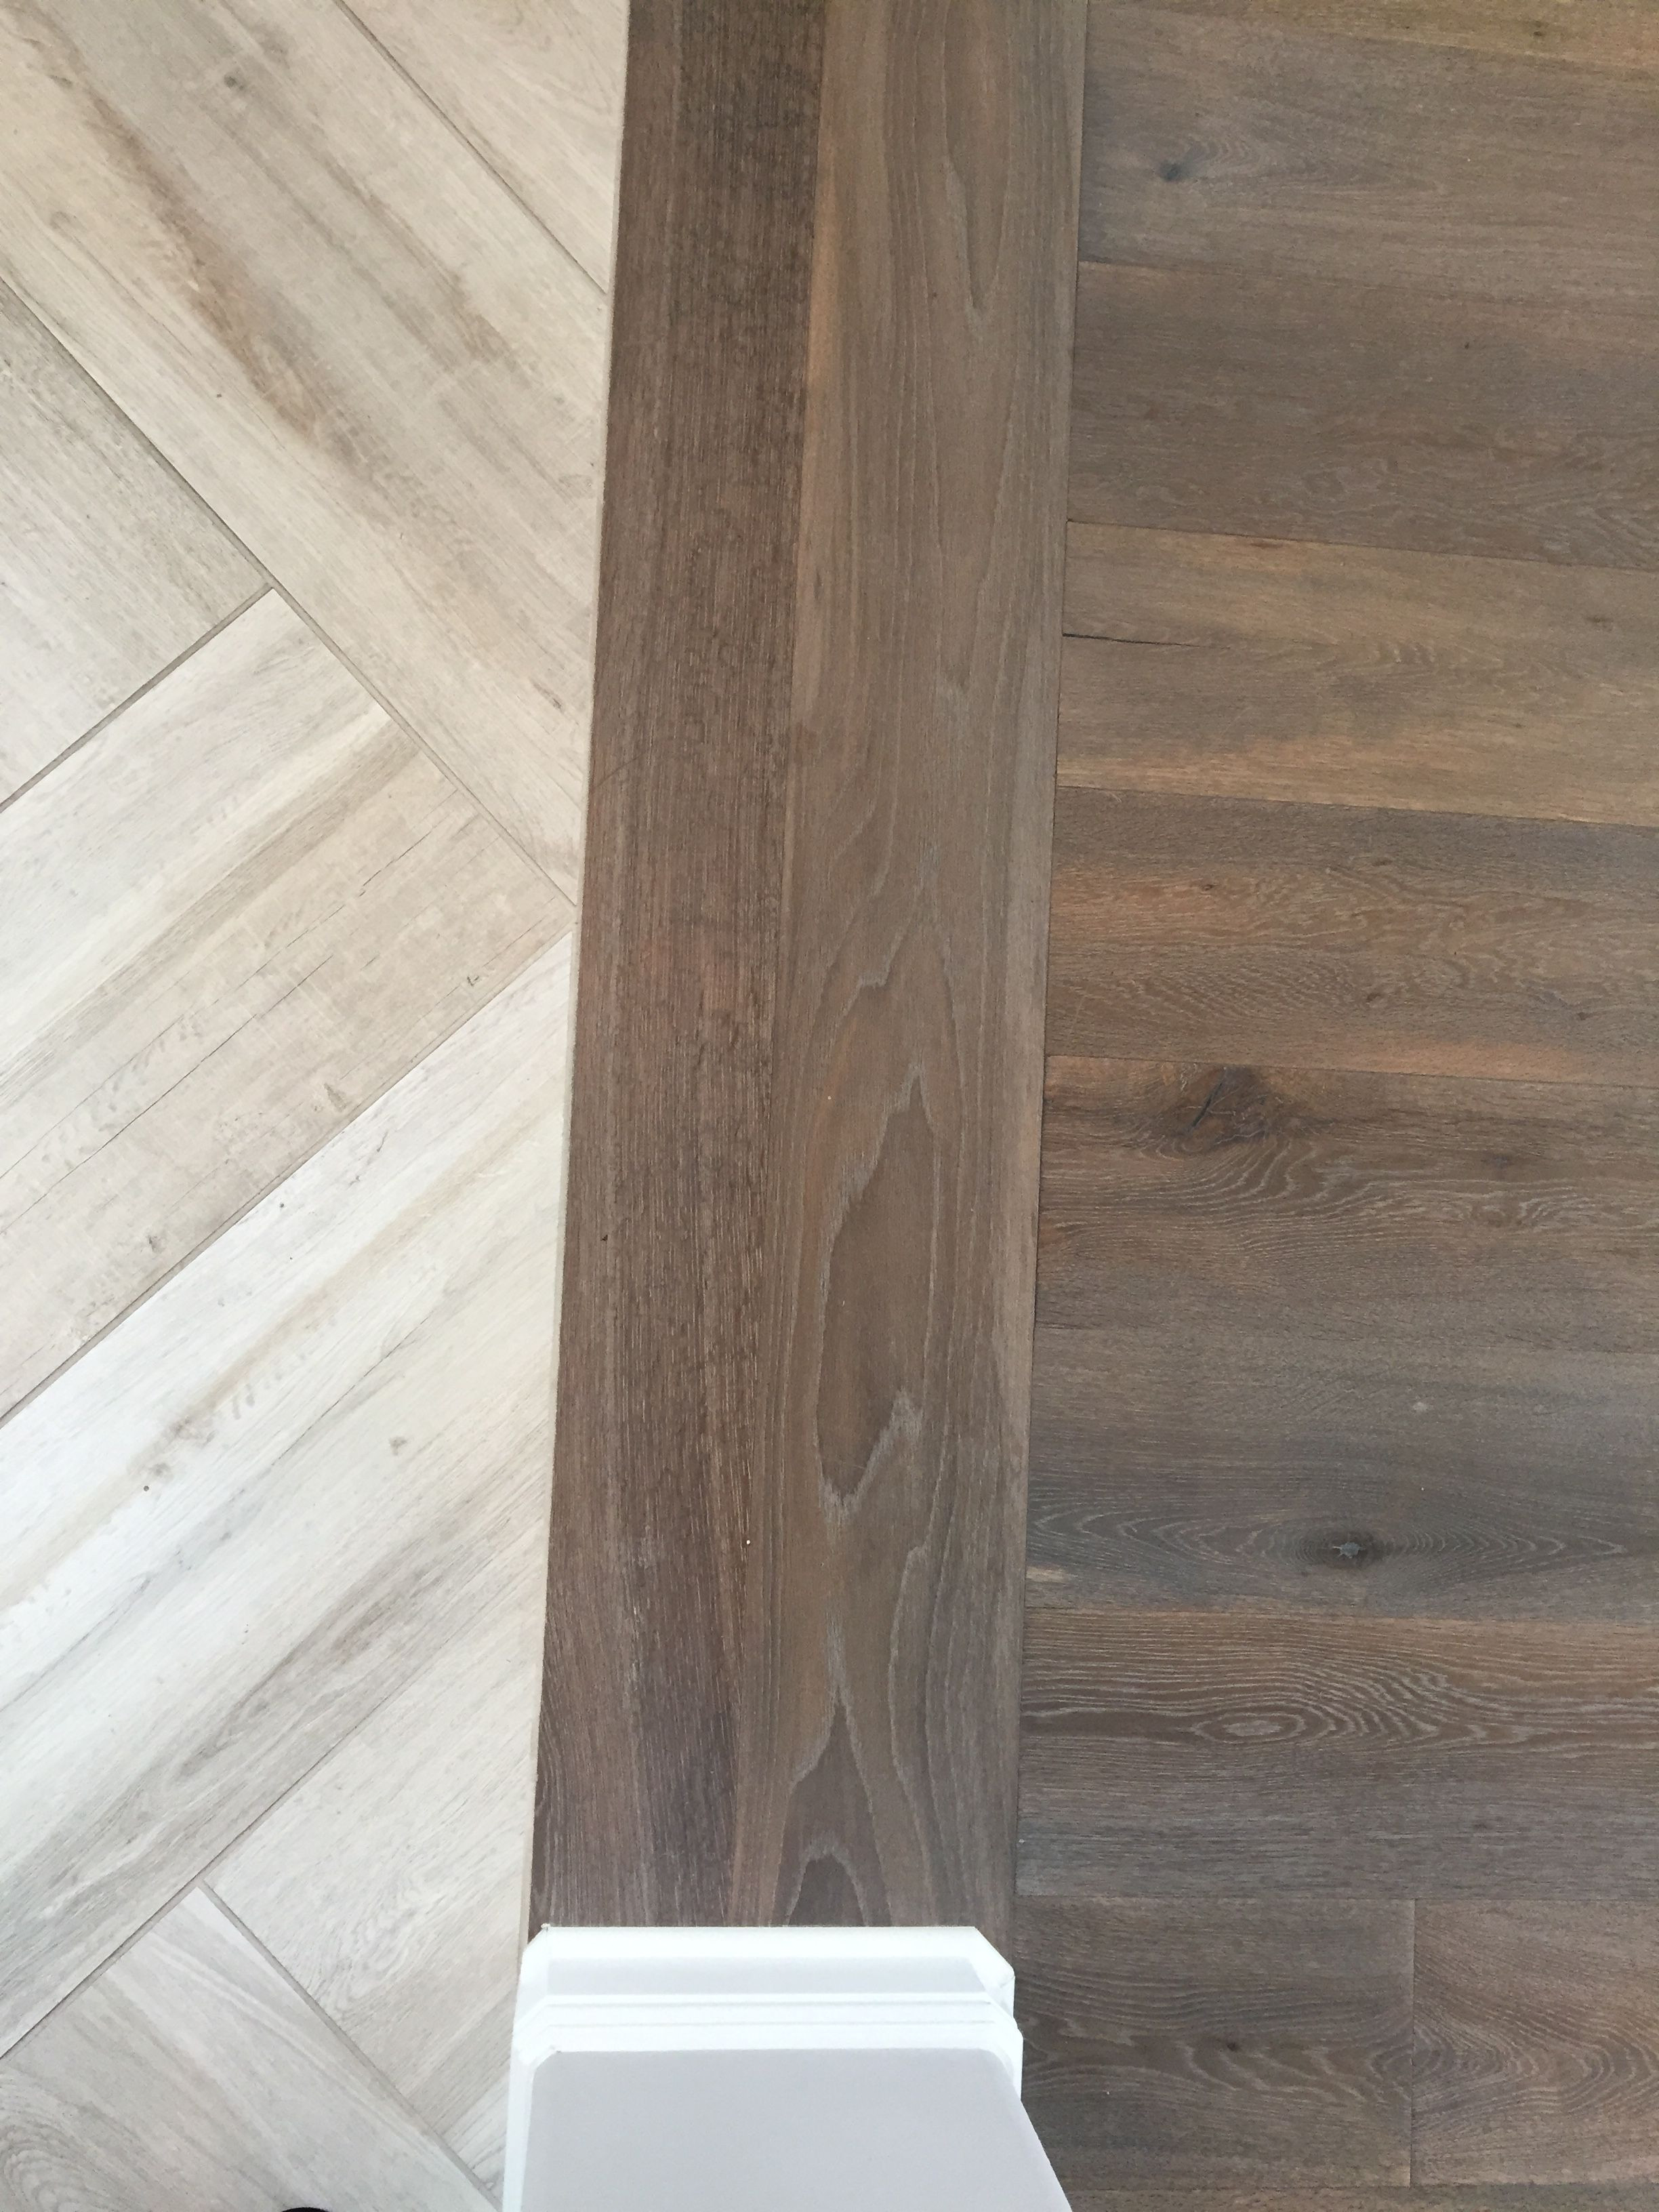 can you glue down hardwood flooring to concrete of floor transition laminate to herringbone tile pattern model regarding floor transition laminate to herringbone tile pattern herringbone tile pattern herringbone wood floor